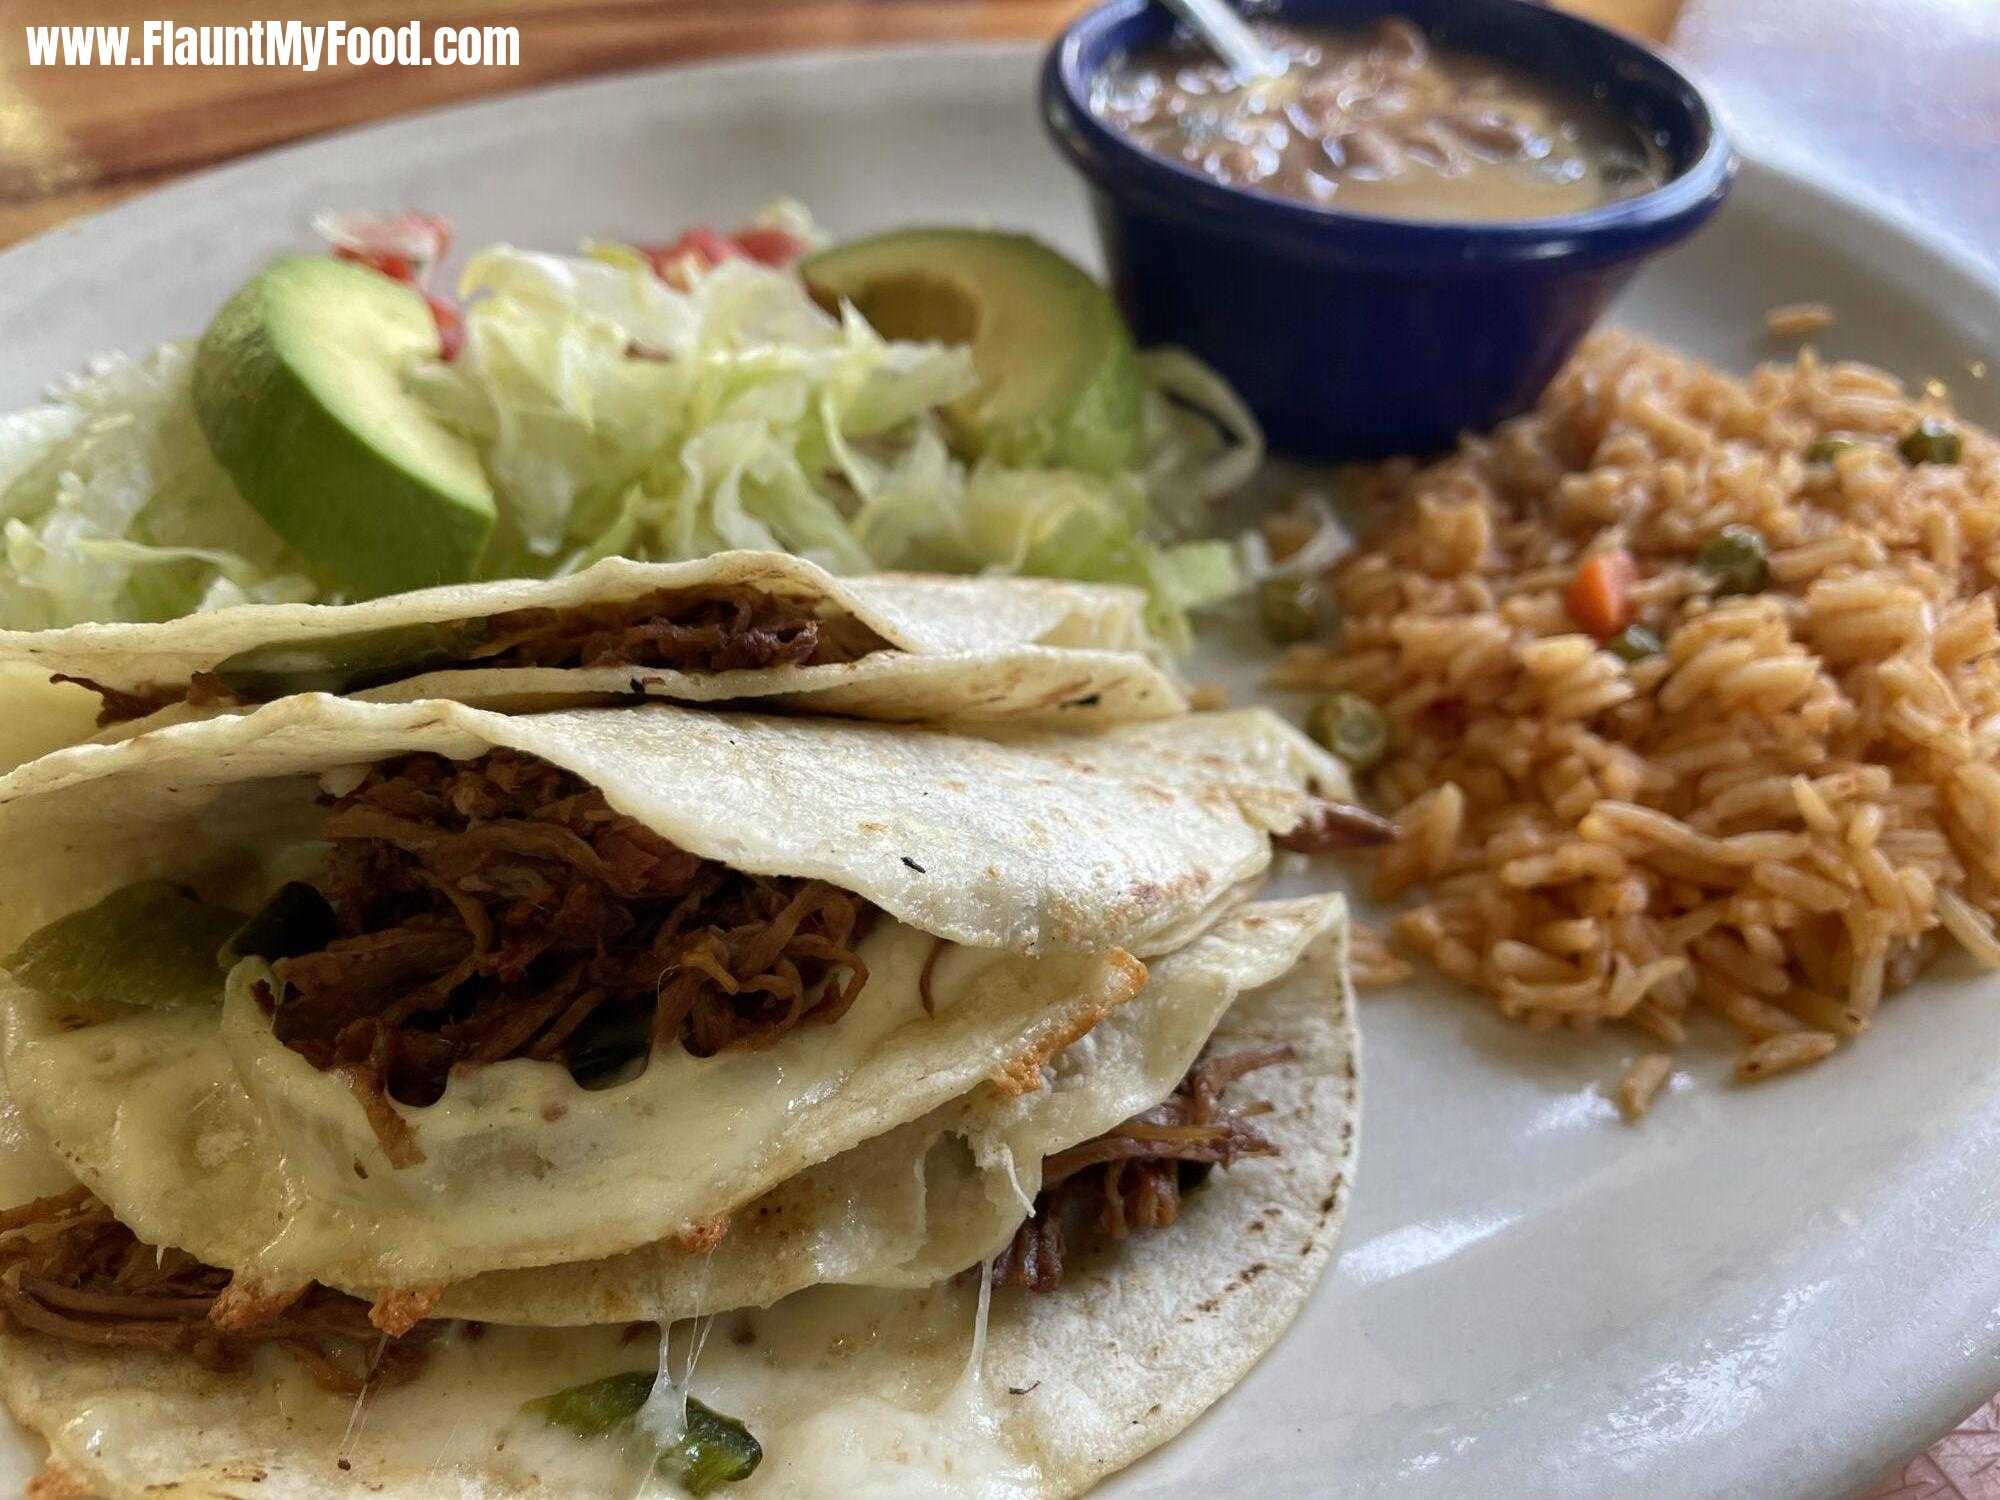 Brisket. Tacos with rice and avocado and beans with green salsa on the side at Esparza‘s in a grapevine, Texas.Brisket. Tacos with rice and avocado and beans with green salsa on the side at Esparza‘s in a grapevine, Texas.